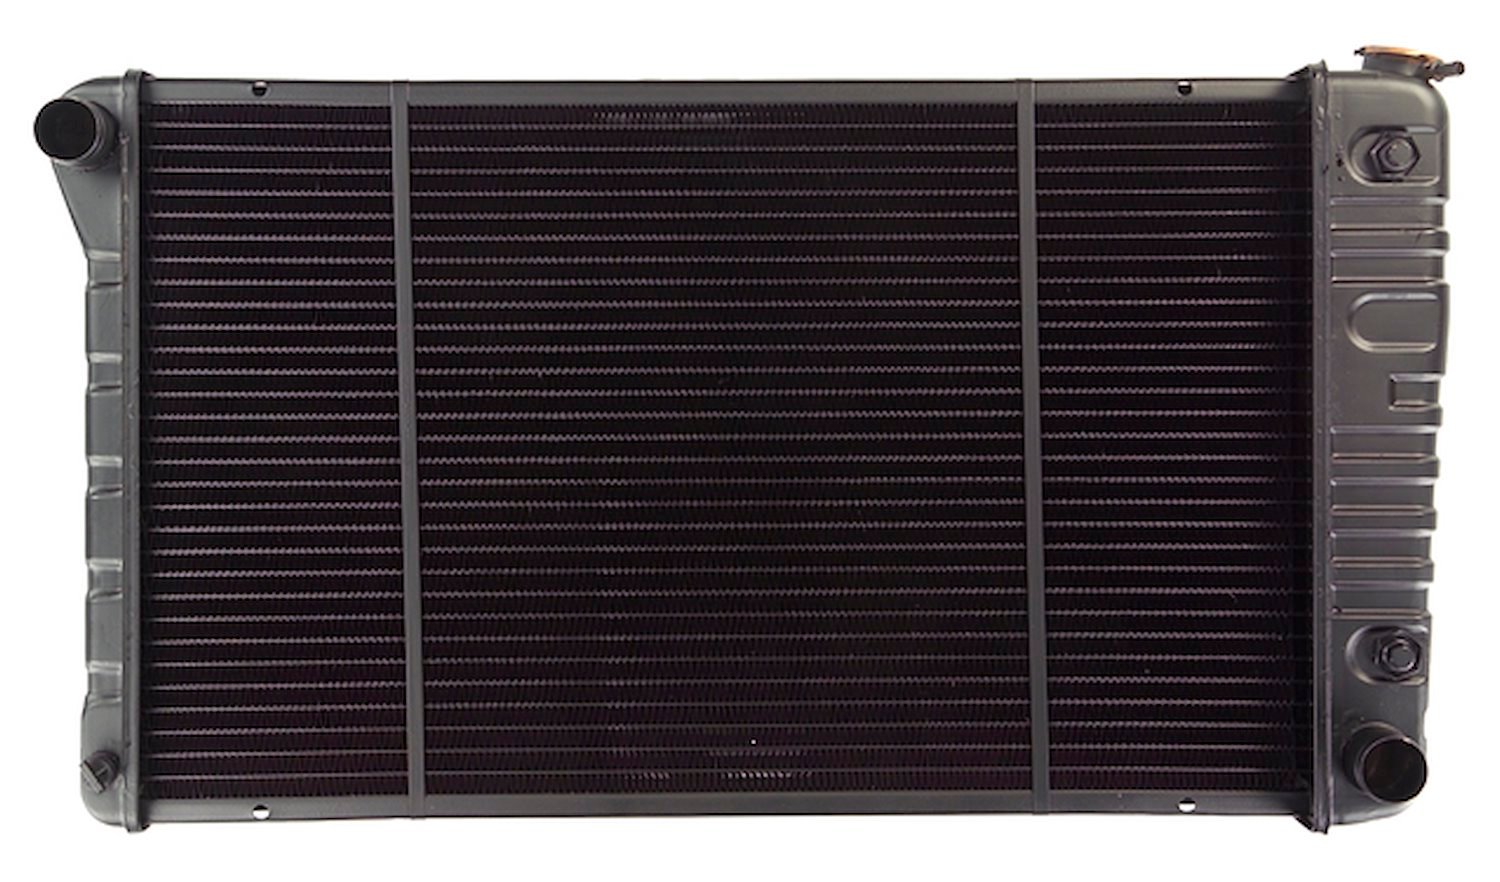 Replacement Radiator Fits Select 1968-1971 Chevrolet, Oldsmobile & Pontiac Models [3-Row]